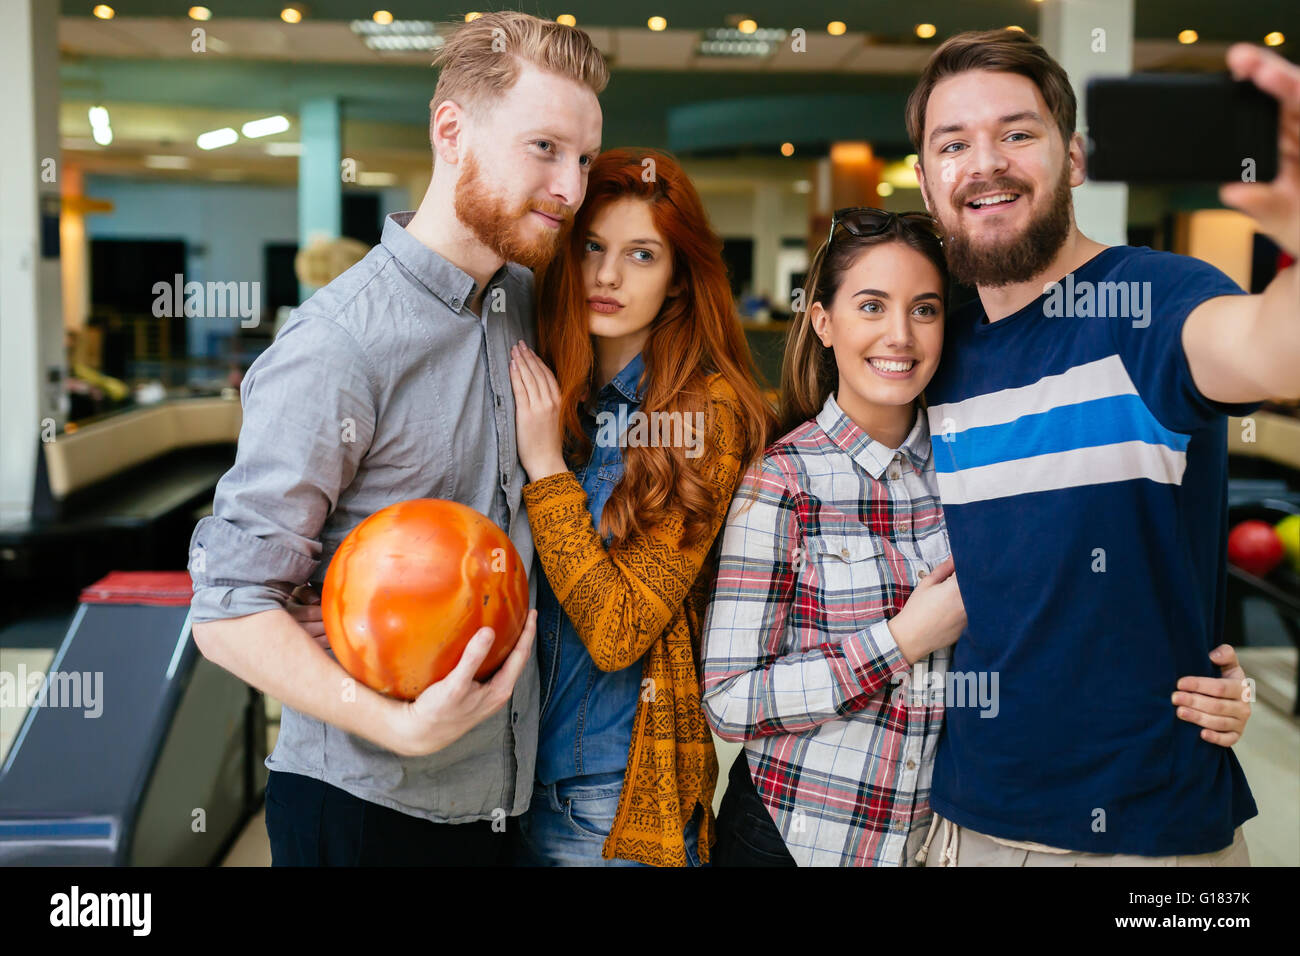 Friends taking selfies of themselves bowling Stock Photo